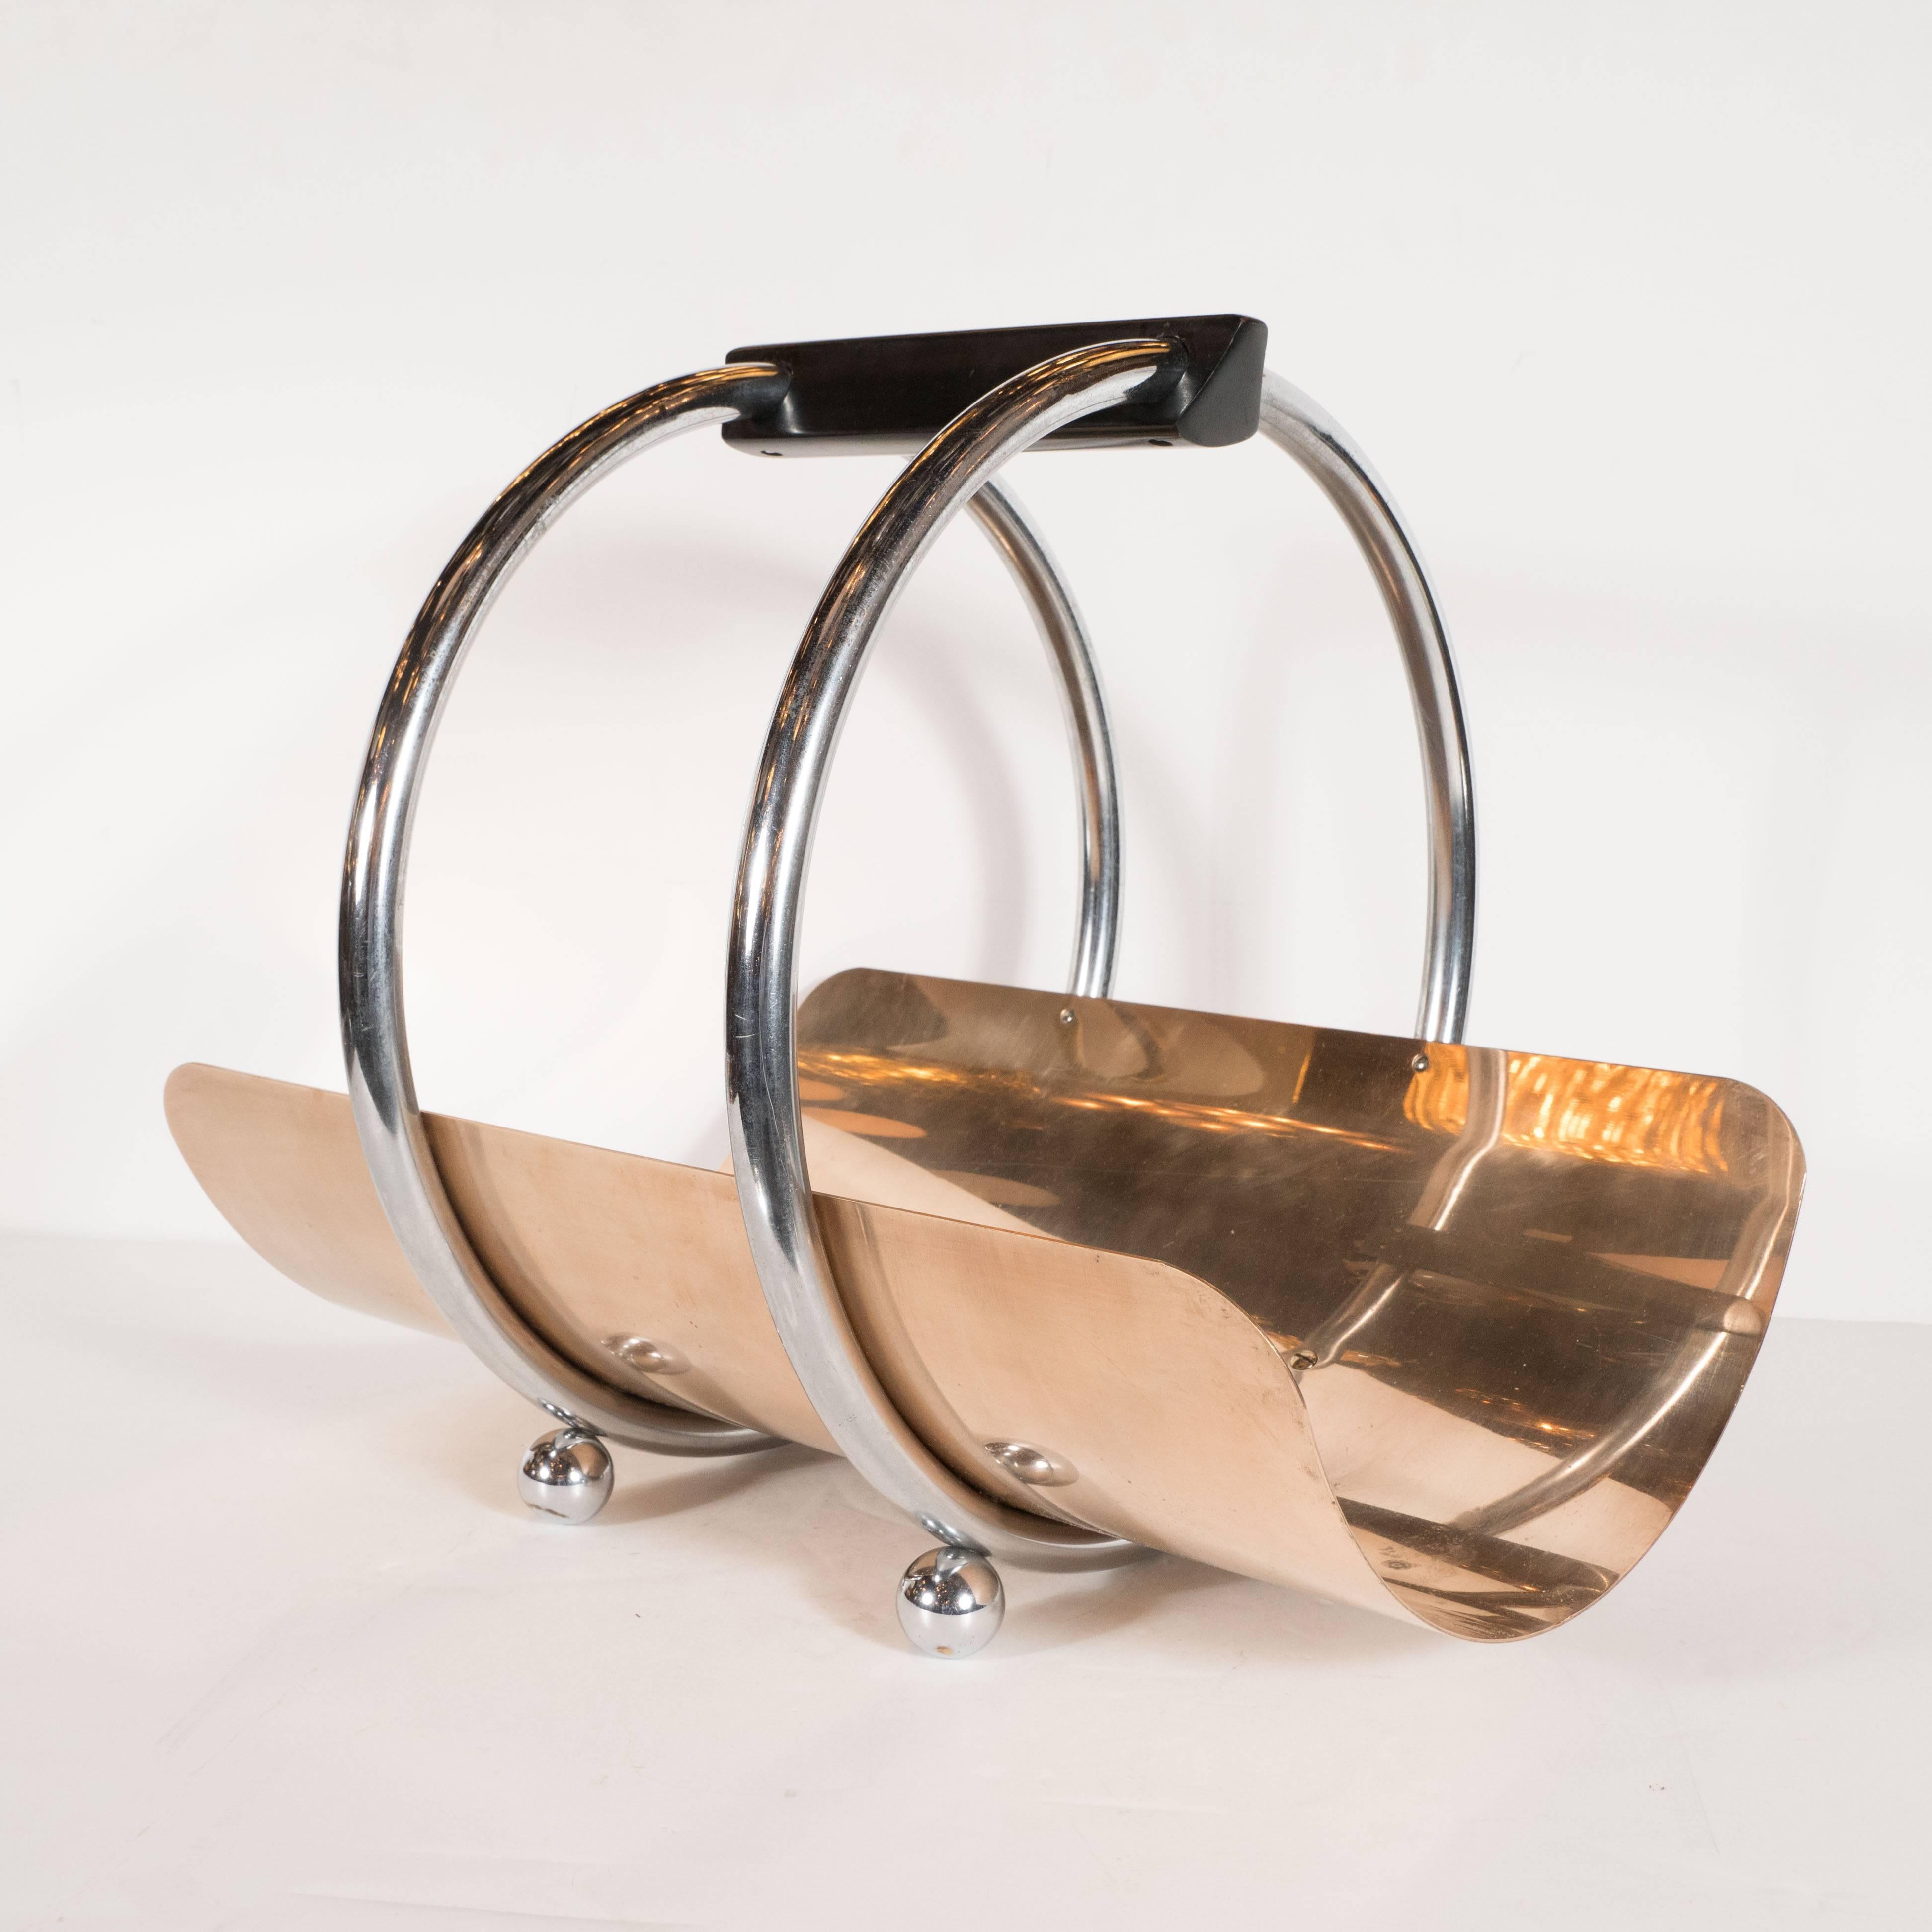 This iconic American streamlined Machine Age Art Deco design- often misattributed to Norman Bel Geddes- was designed by Leslie Beaton for the Revere Copper and Chrome Company, circa 1935. The belly of the holder is composed of a curved sheet of